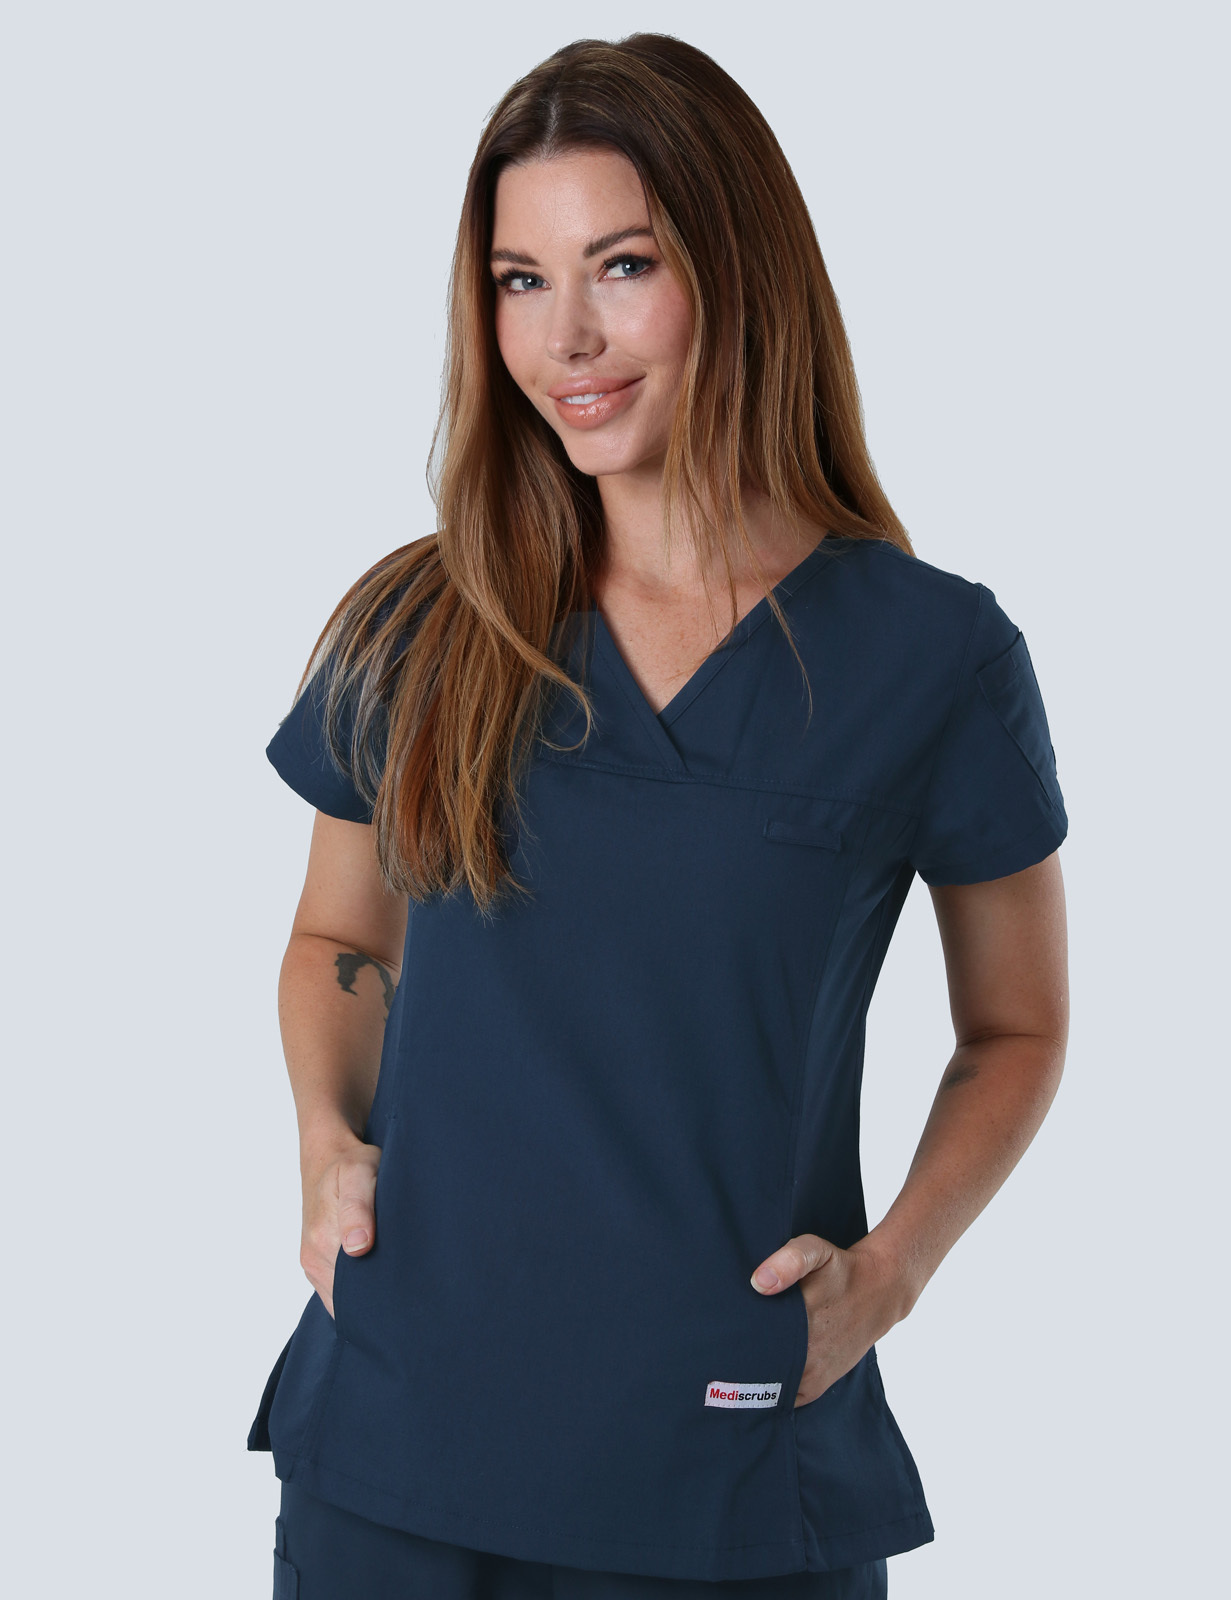 Weipa Hospital - ED RN (Women's Fit Solid Scrub Top and Cargo Pants in Navy incl Logos)